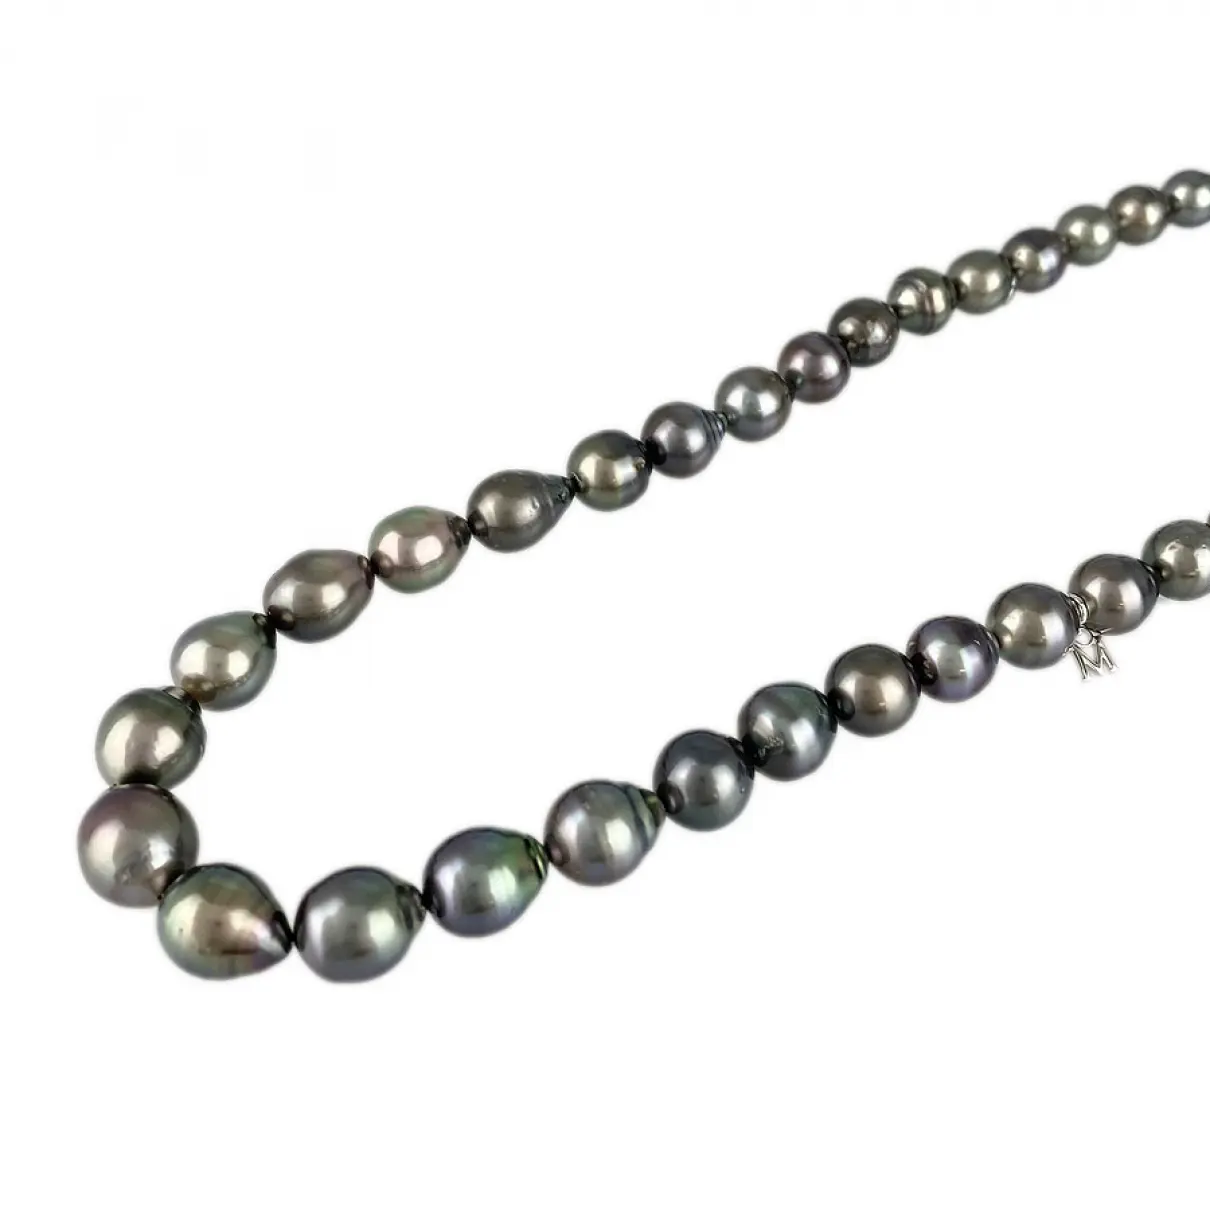 Buy Mikimoto White gold necklace online